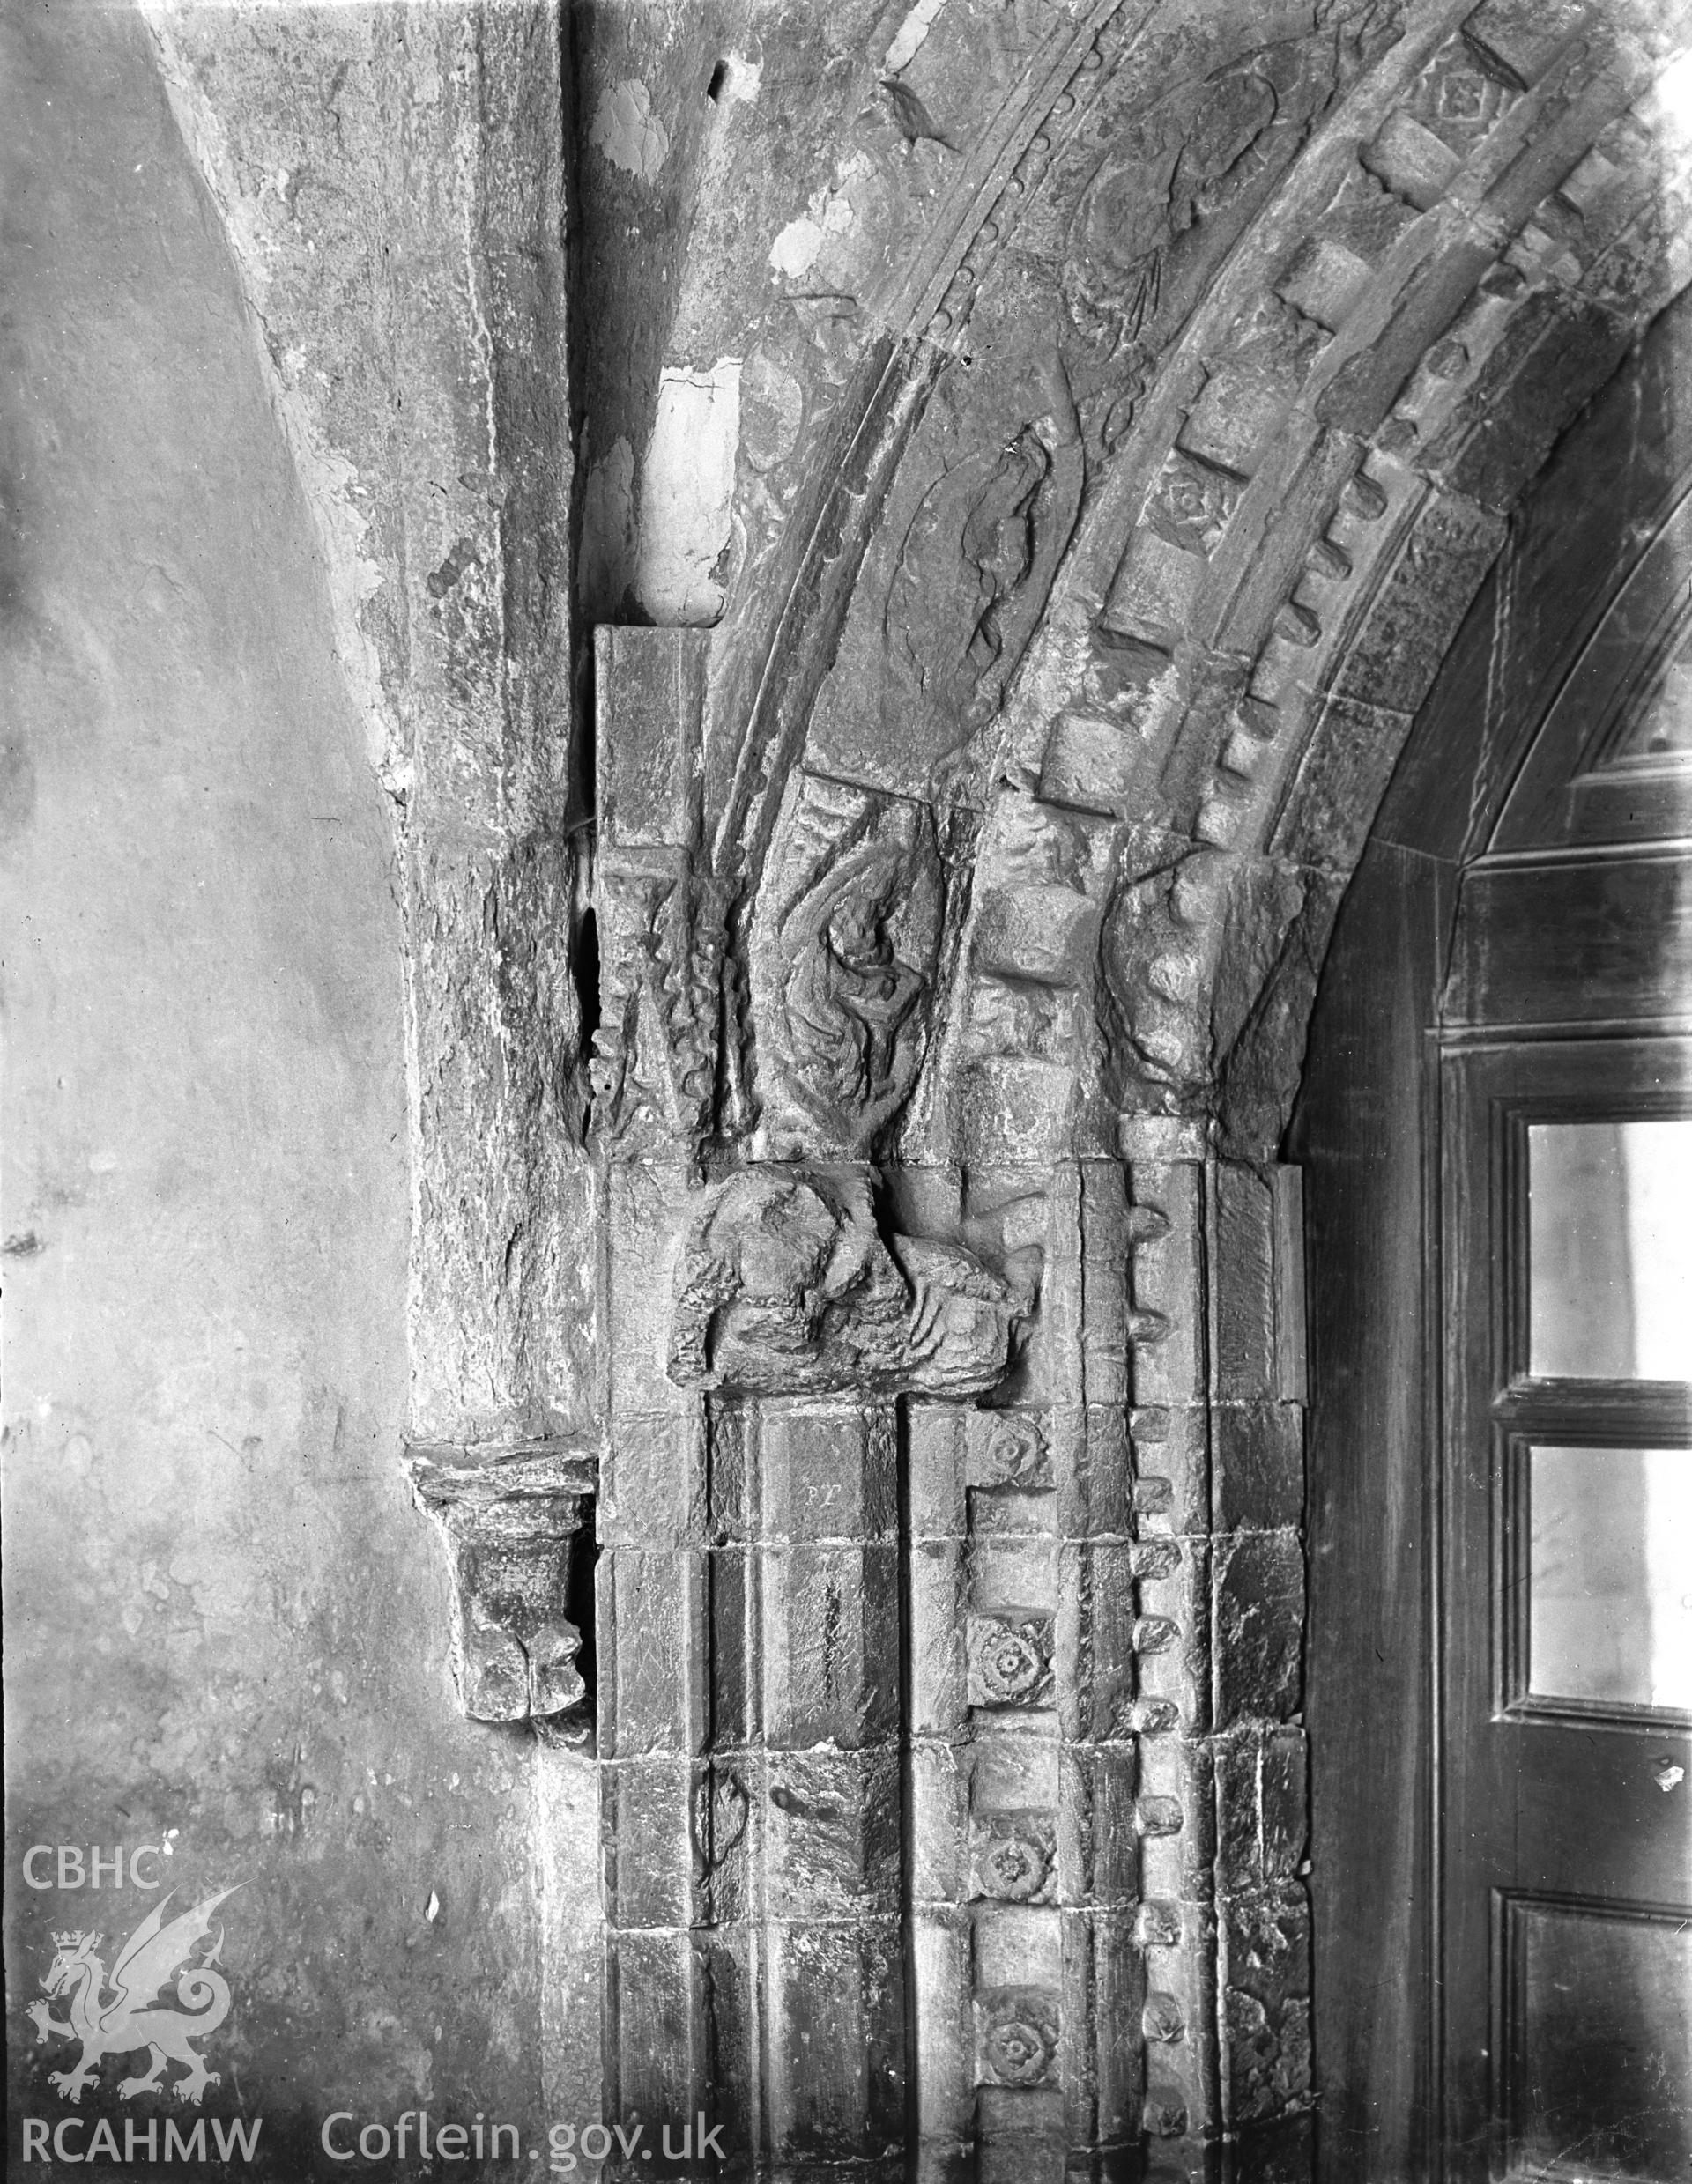 Detailed view of stone carving on the inner doors of the south porch at St David's Catherdral.